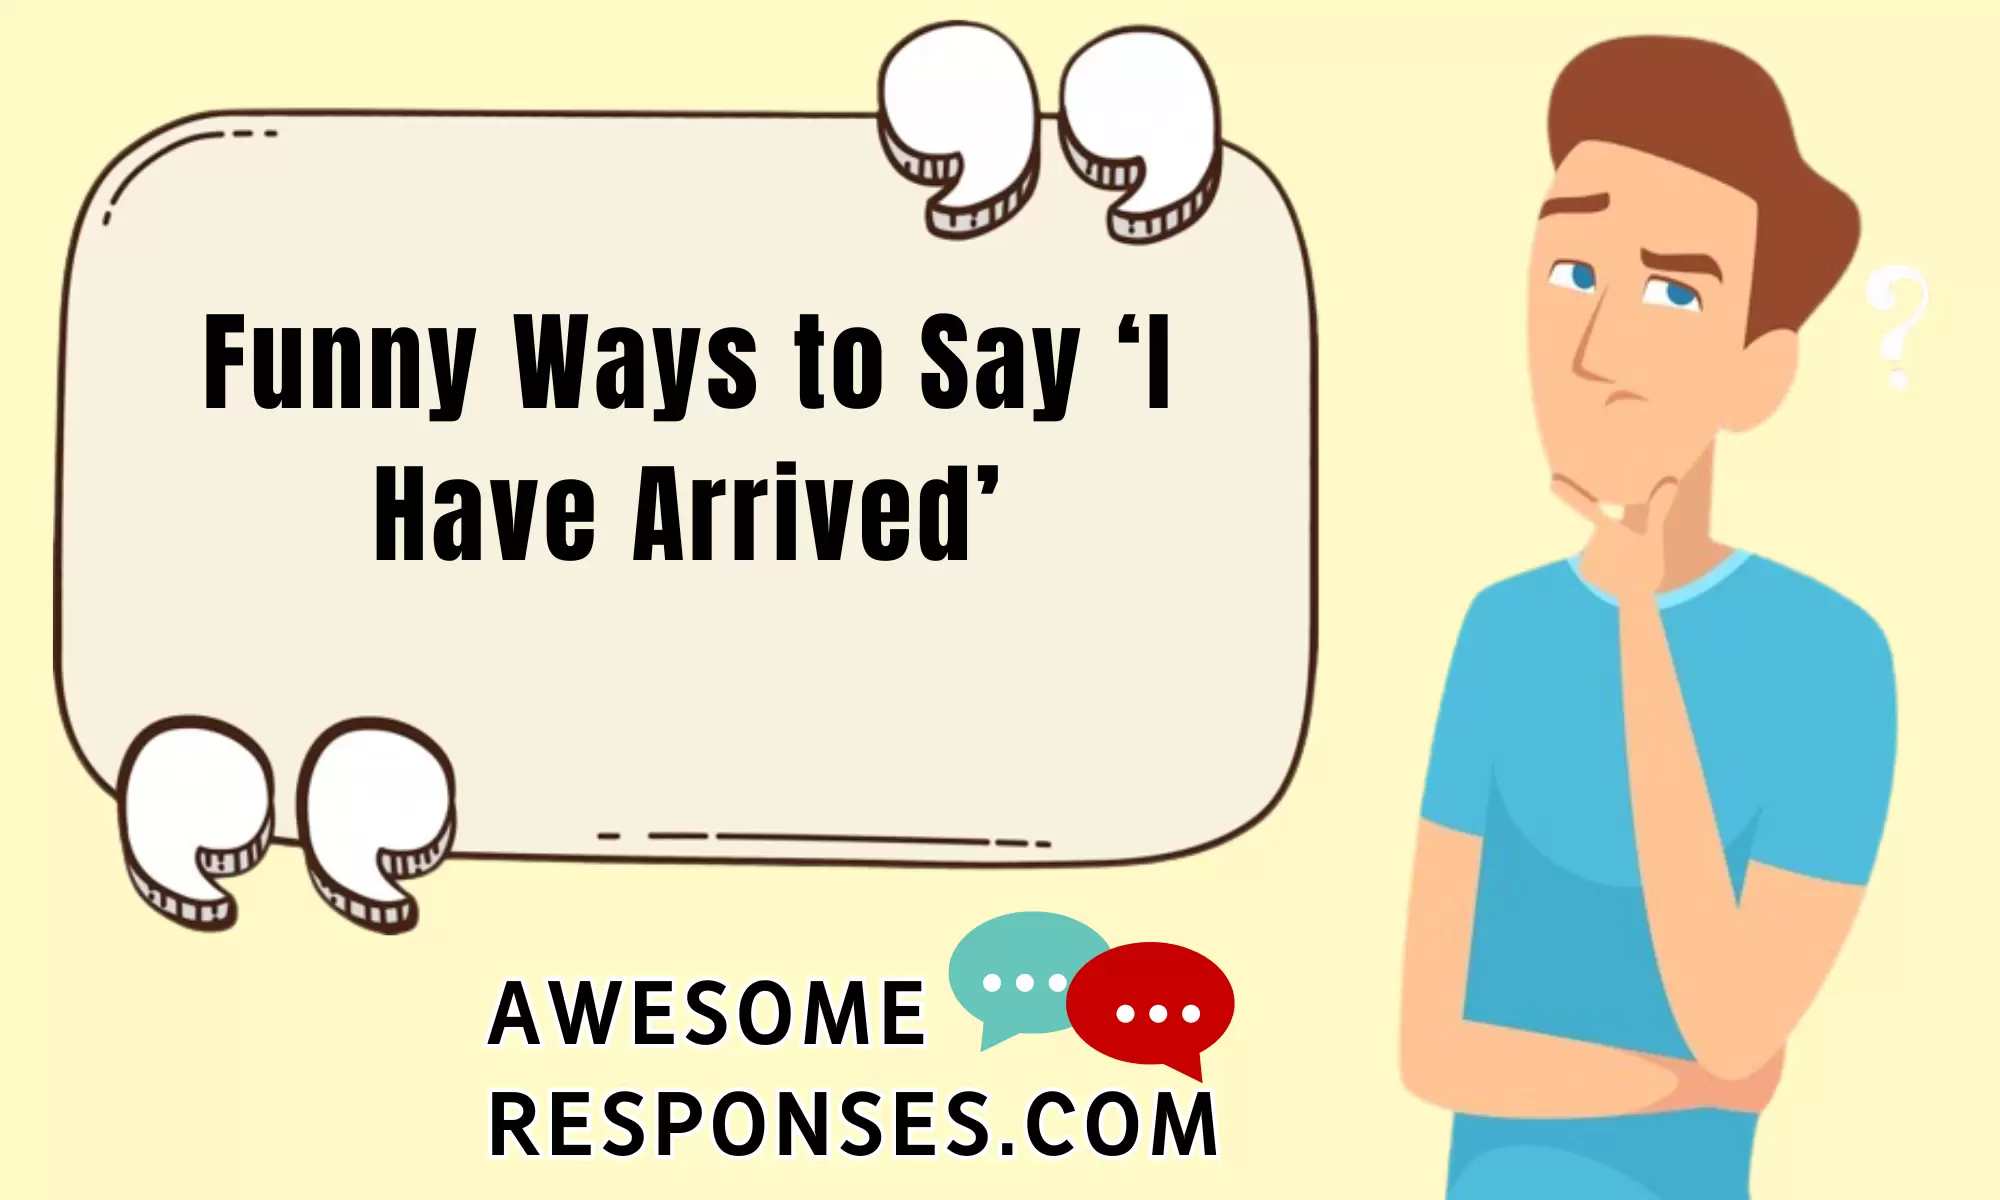 Funny Ways to Say ‘I Have Arrived’